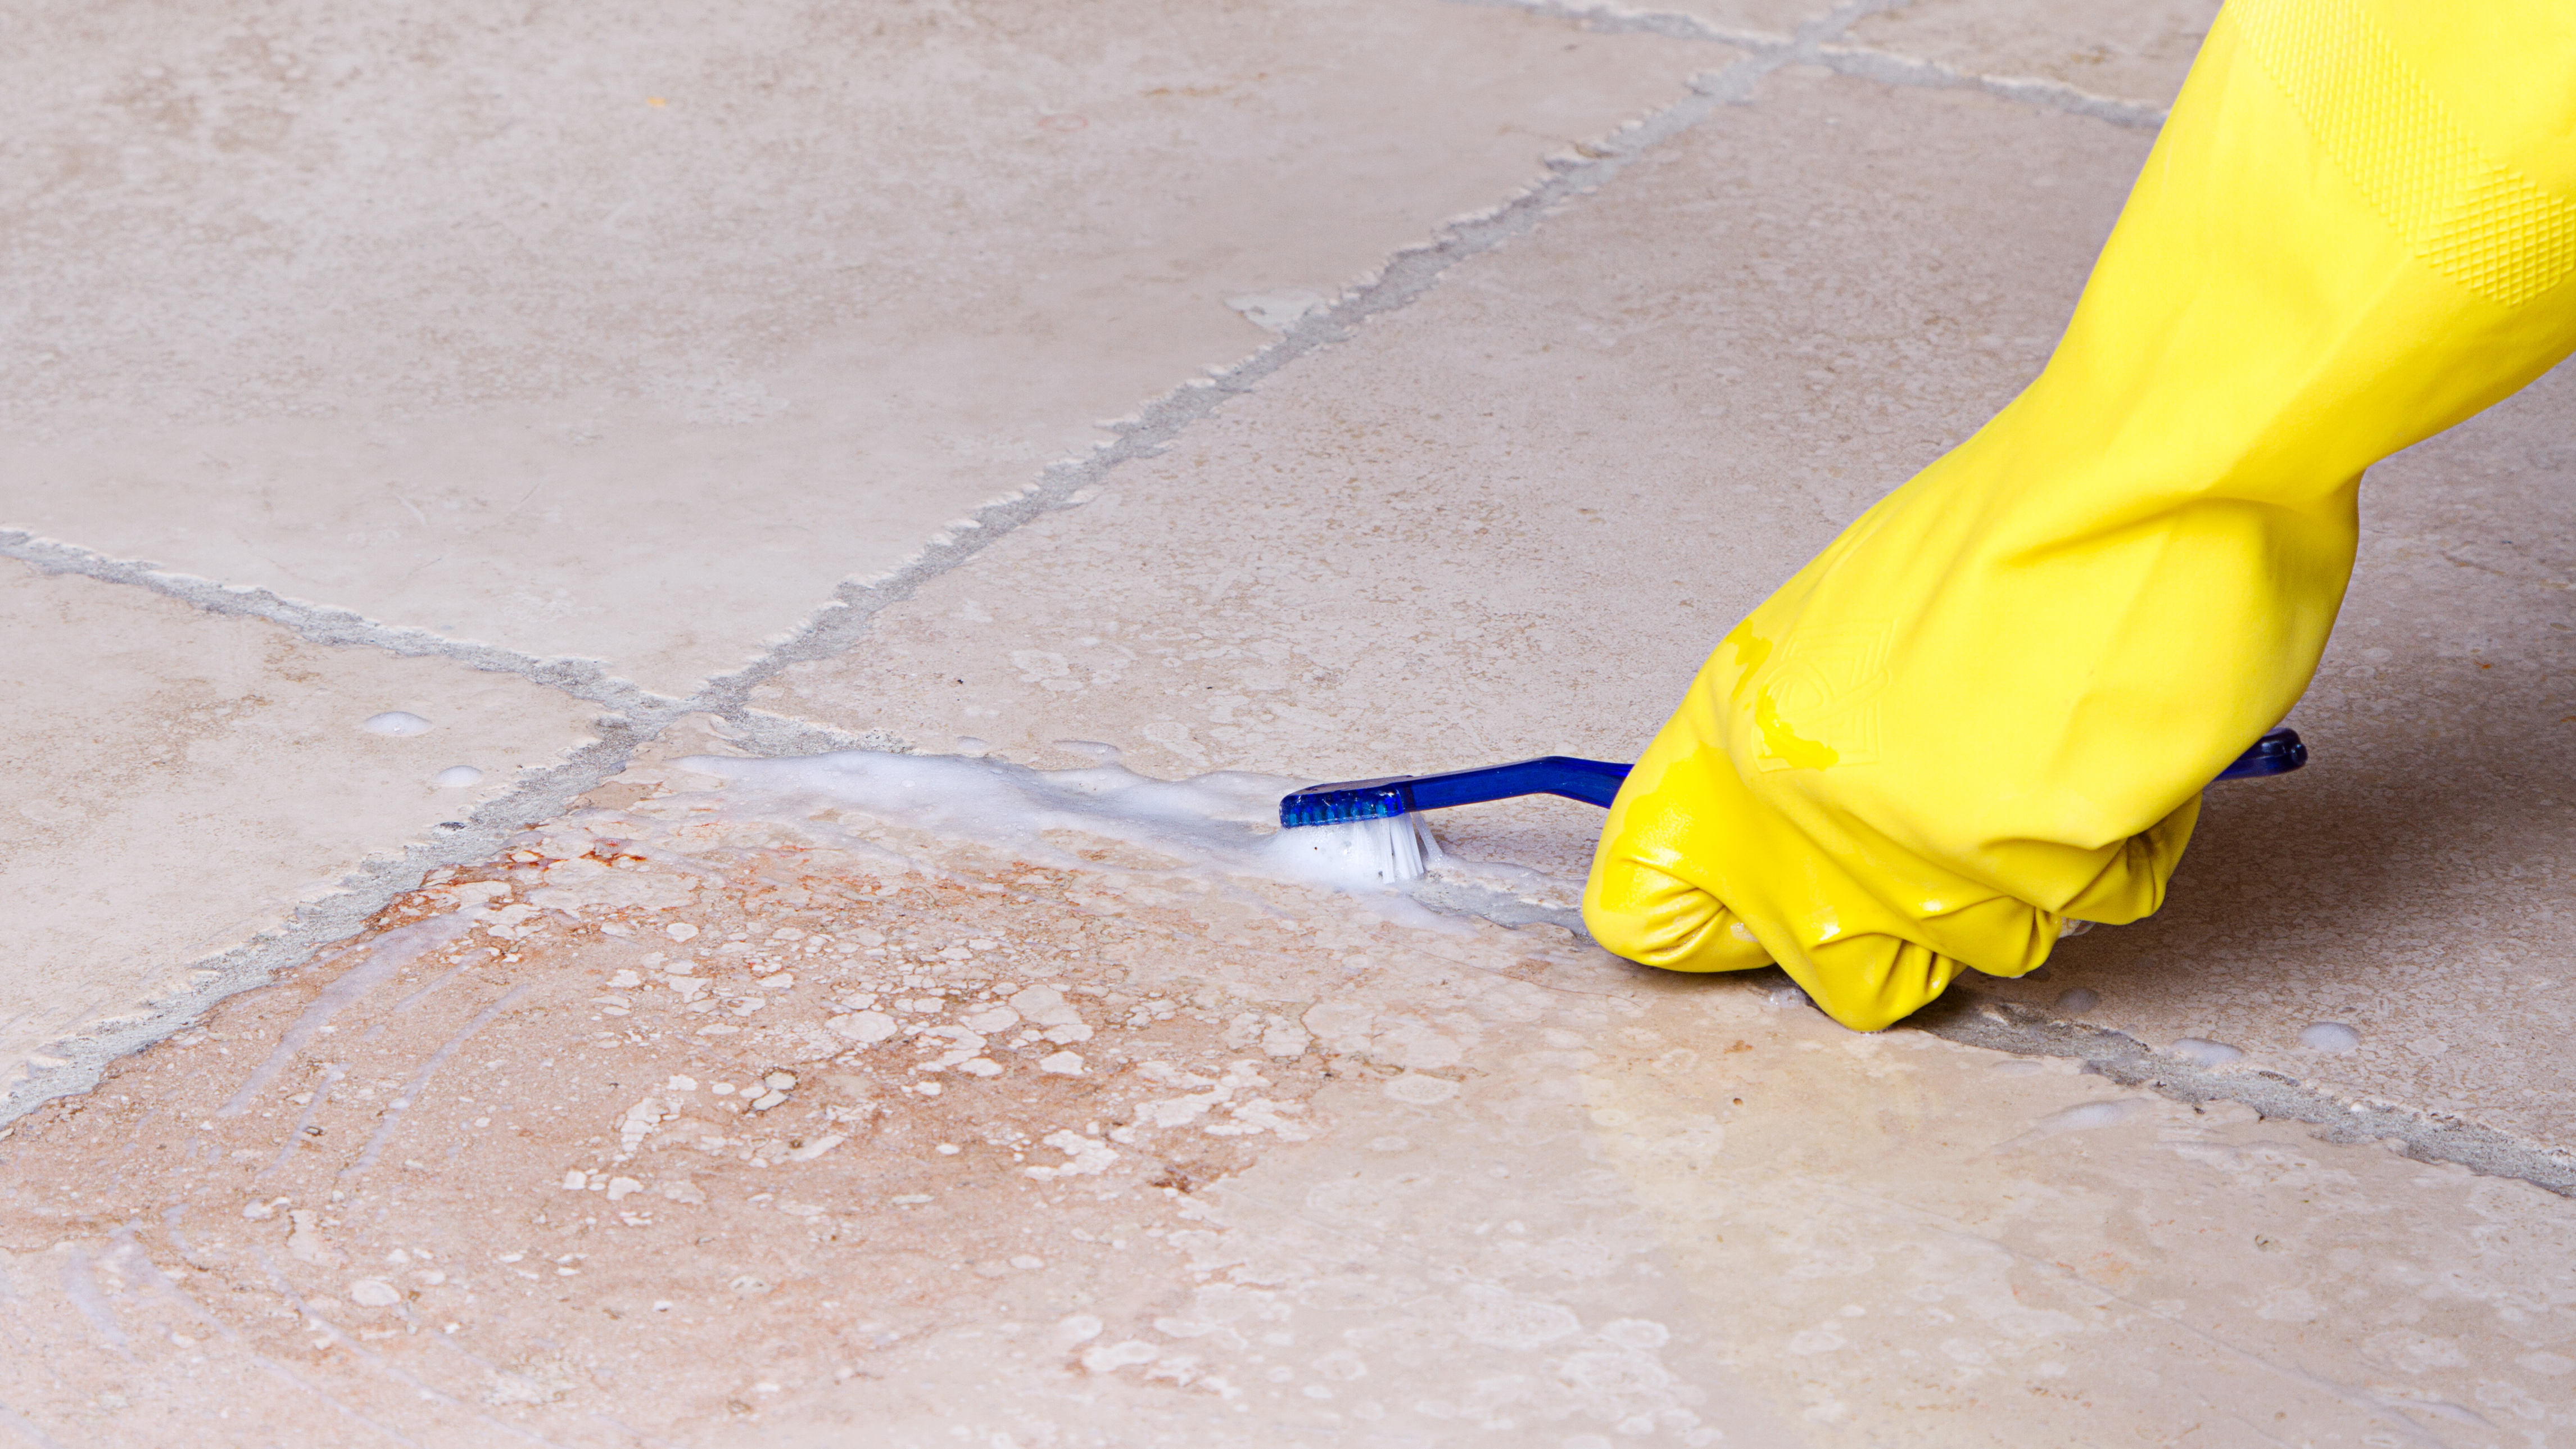 How To Clean Grout On Floor Tiles, How To Clean Whiten Tile Grout